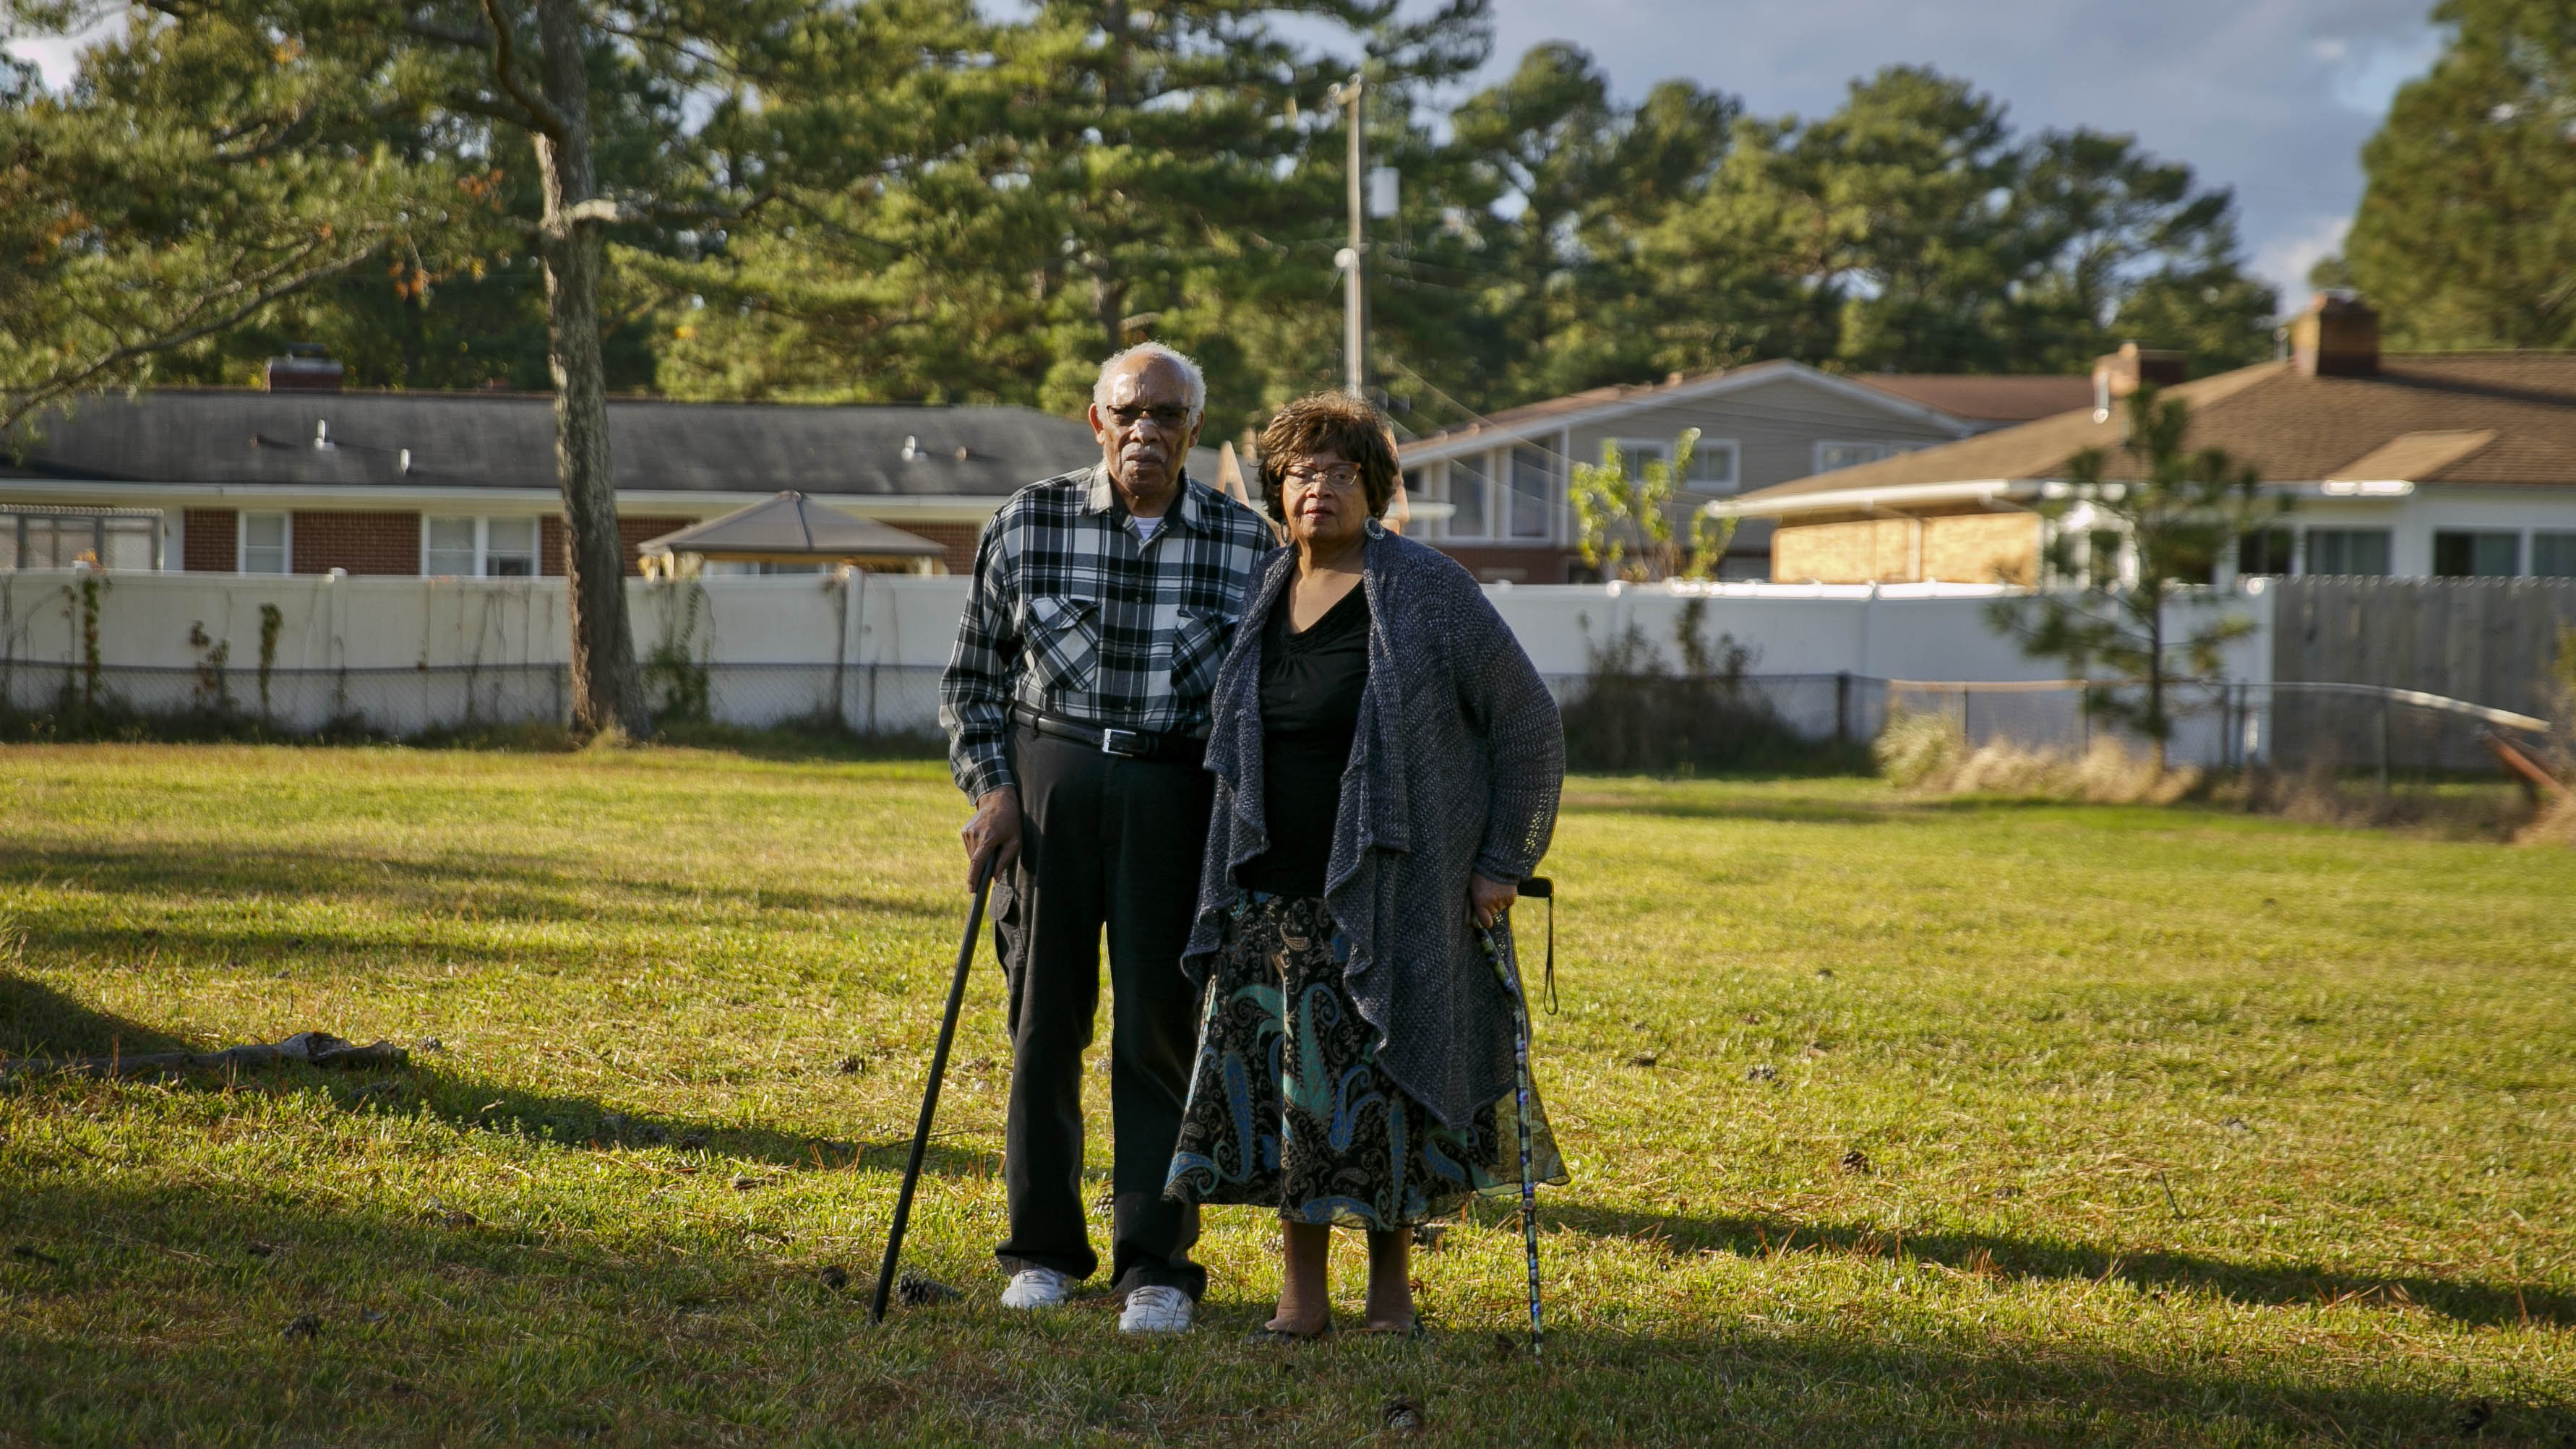 Photo by Kristen Zeis. John and Gloria Creekmur stand in the front yard of what was once their house. The Creekmurs built the home in 1968 and moved out in 2012 as part of Chesapeake’s program that buys properties that frequently flood. 